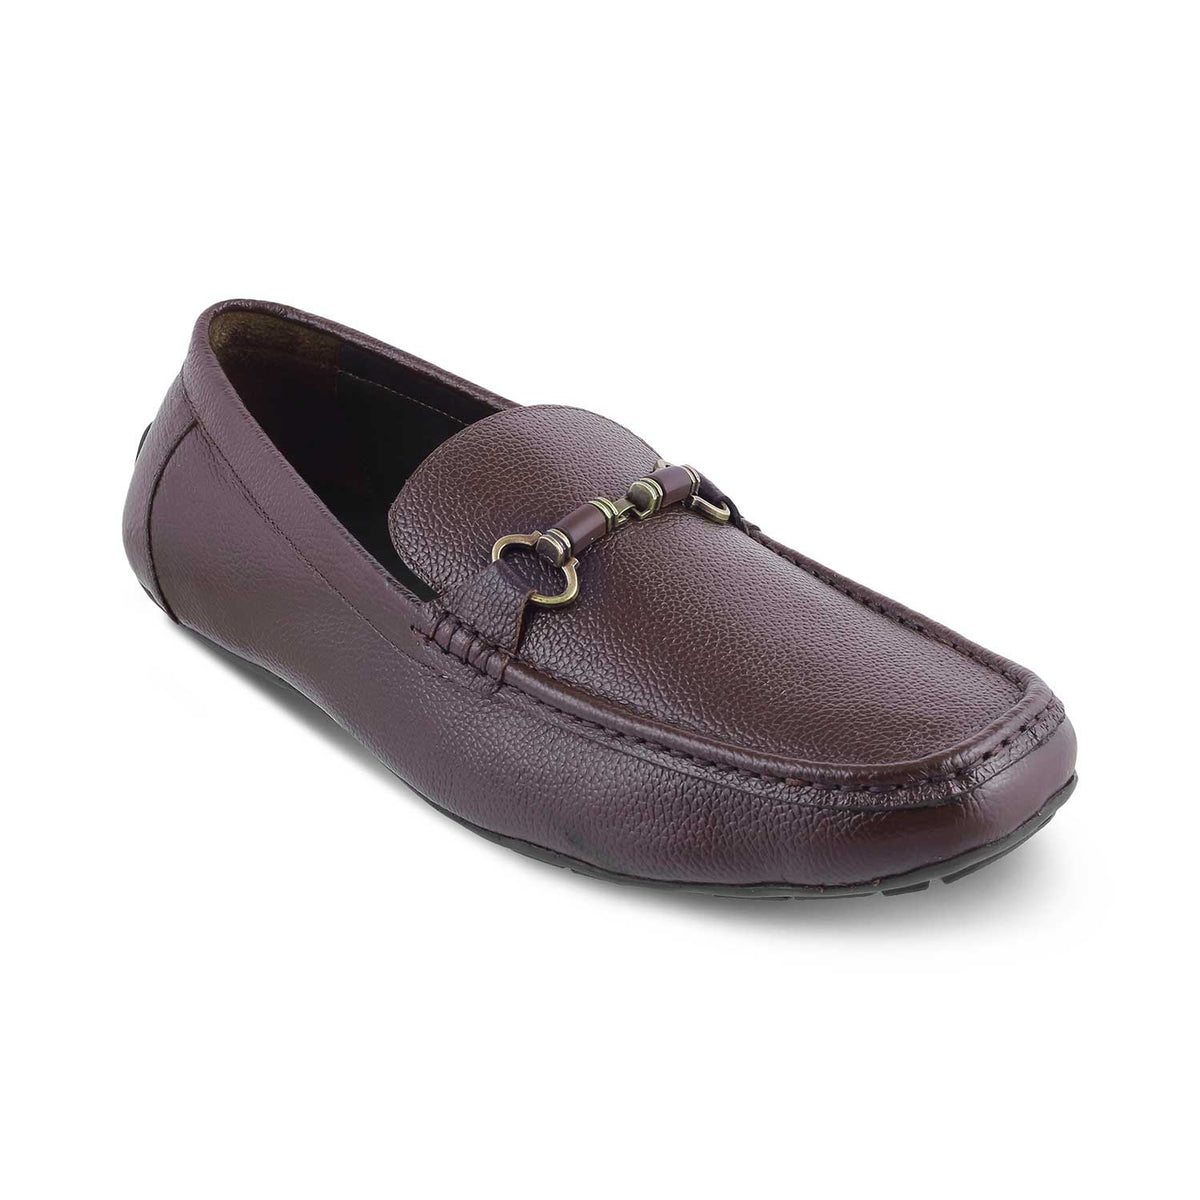 The Robuk Brown Men's Leather Driving Loafers Tresmode